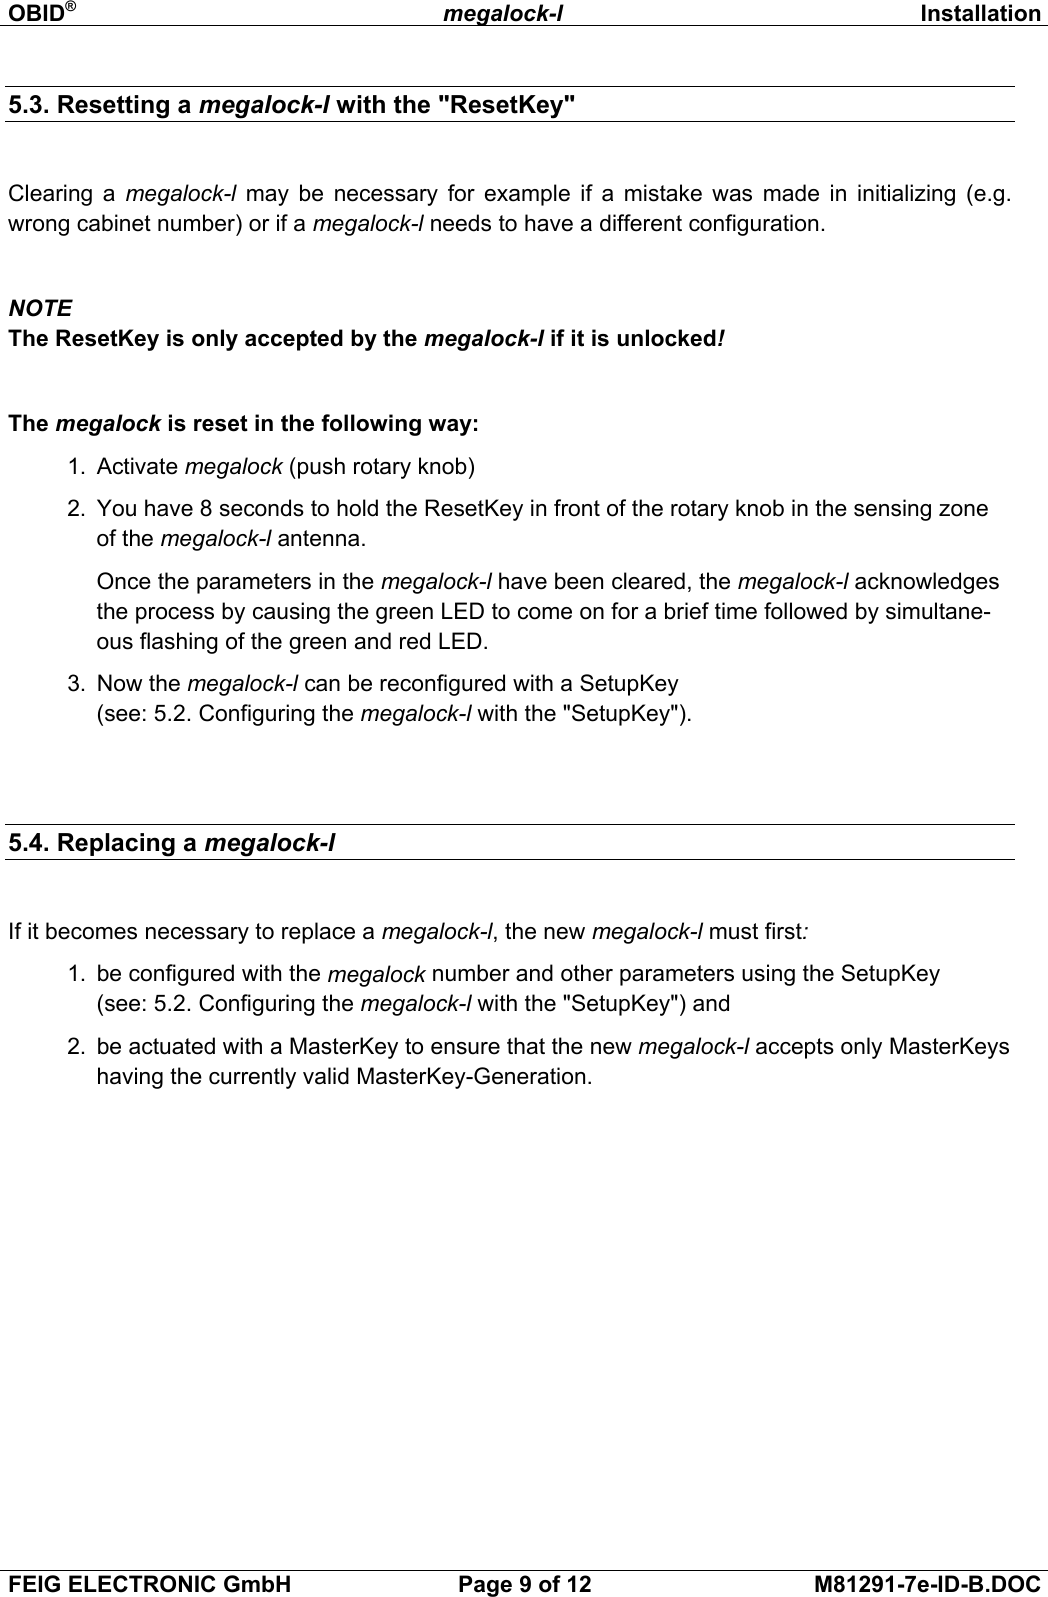 OBID®megalock-l InstallationFEIG ELECTRONIC GmbH Page 9 of 12 M81291-7e-ID-B.DOC5.3. Resetting a megalock-l with the &quot;ResetKey&quot;Clearing a megalock-l may be necessary for example if a mistake was made in initializing (e.g.wrong cabinet number) or if a megalock-l needs to have a different configuration.NOTEThe ResetKey is only accepted by the megalock-l if it is unlocked!The megalock is reset in the following way:1.  Activate megalock (push rotary knob)2.  You have 8 seconds to hold the ResetKey in front of the rotary knob in the sensing zoneof the megalock-l antenna. Once the parameters in the megalock-l have been cleared, the megalock-l acknowledgesthe process by causing the green LED to come on for a brief time followed by simultane-ous flashing of the green and red LED.3.  Now the megalock-l can be reconfigured with a SetupKey(see: 5.2. Configuring the megalock-l with the &quot;SetupKey&quot;).5.4. Replacing a megalock-lIf it becomes necessary to replace a megalock-l, the new megalock-l must first:1.  be configured with the megalock number and other parameters using the SetupKey(see: 5.2. Configuring the megalock-l with the &quot;SetupKey&quot;) and2.  be actuated with a MasterKey to ensure that the new megalock-l accepts only MasterKeyshaving the currently valid MasterKey-Generation. 